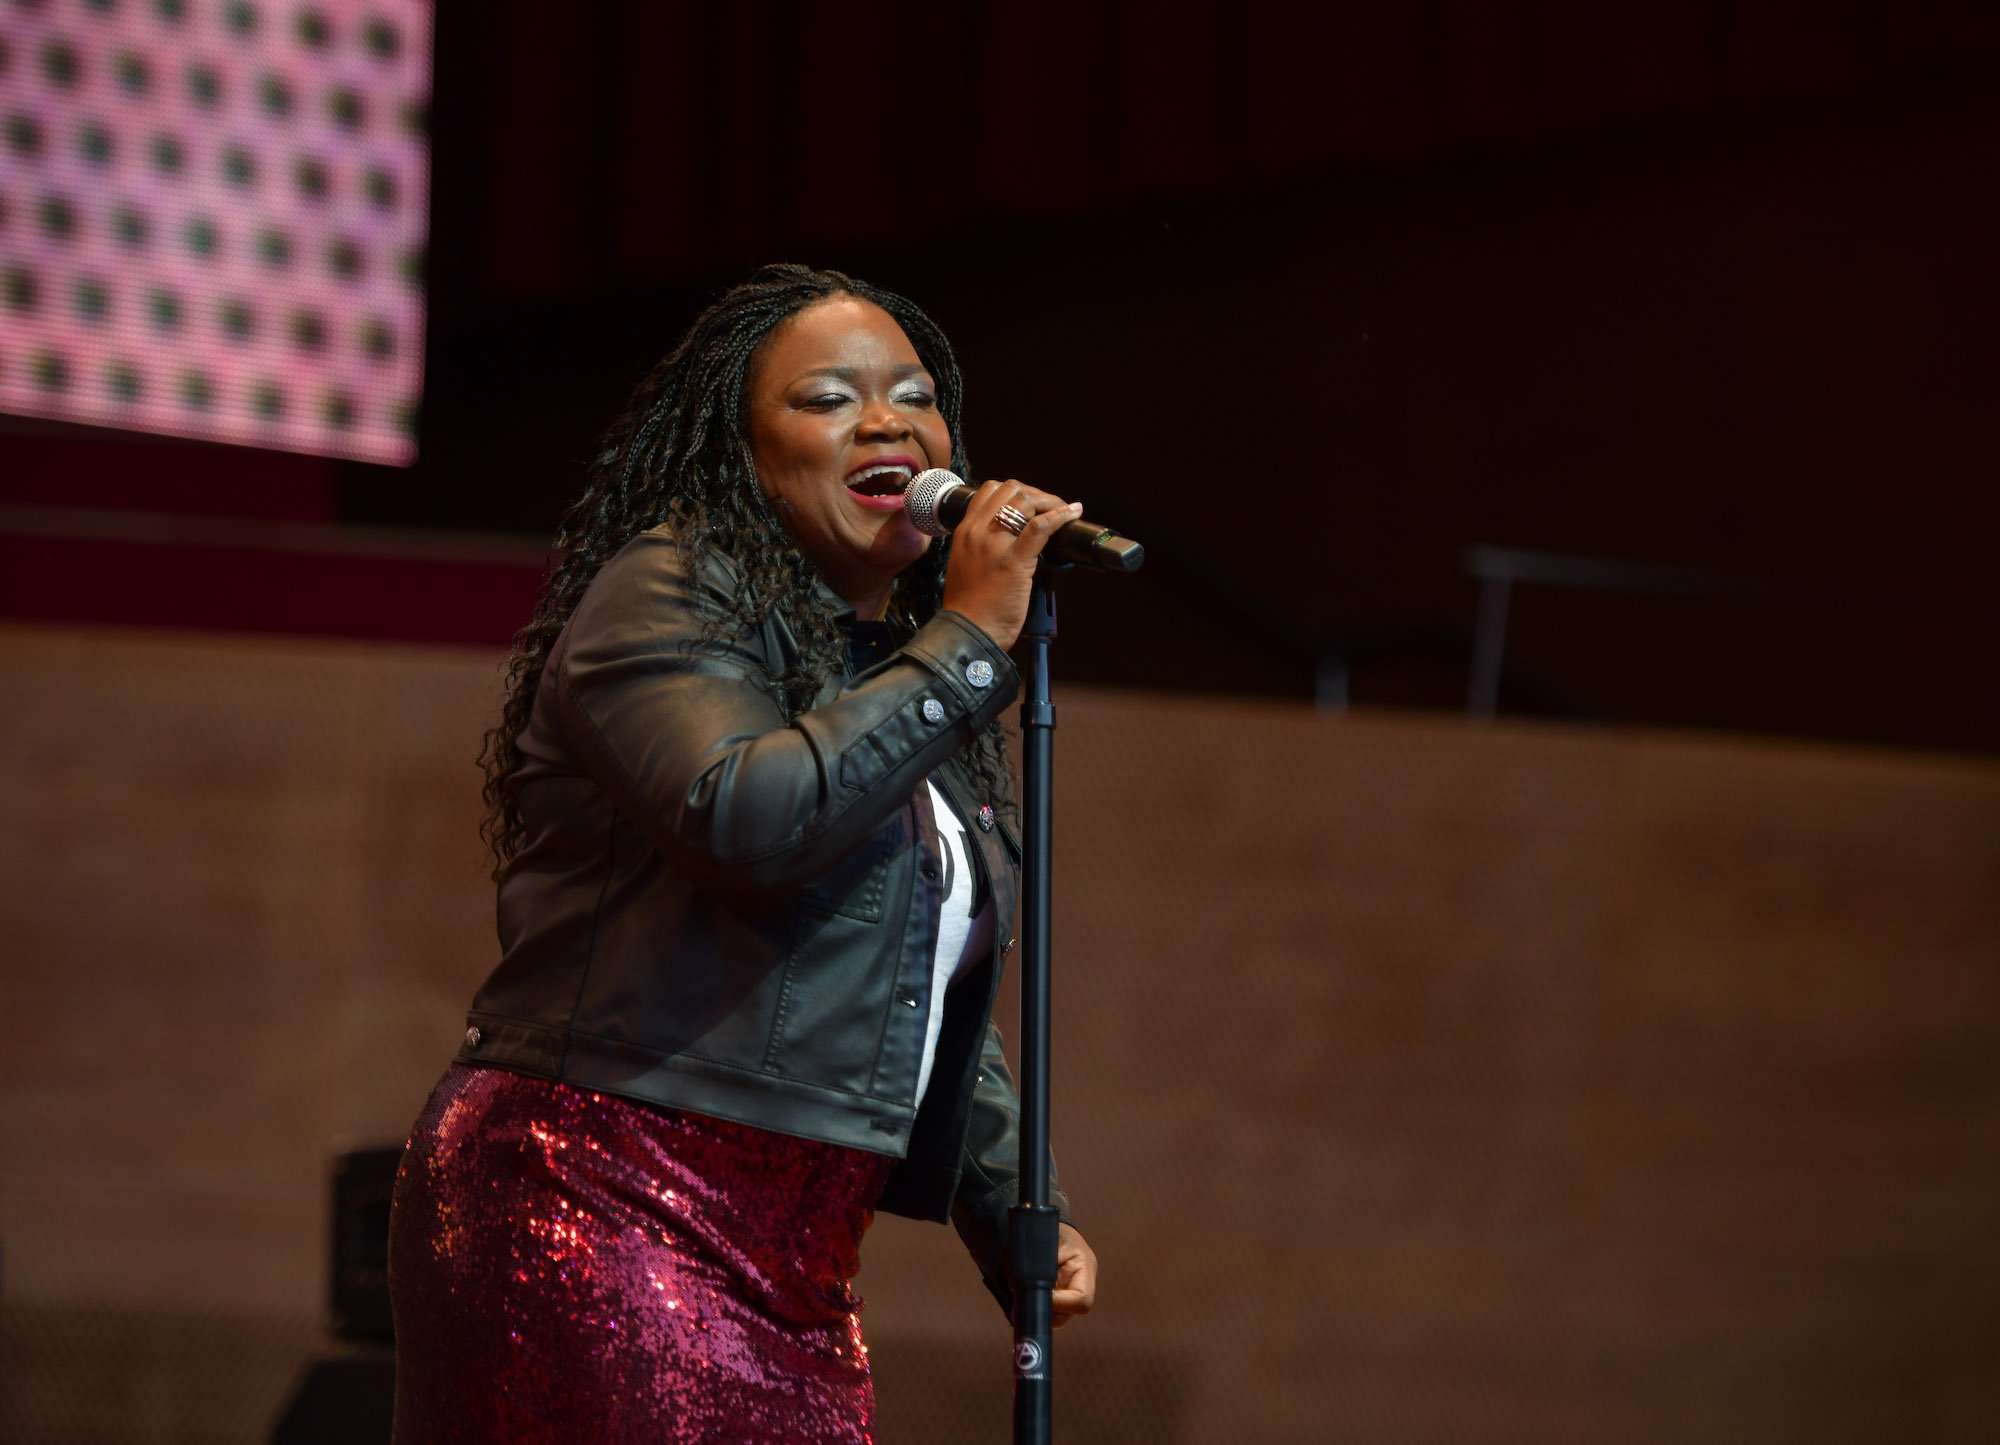 Shemekia Copeland Live At Chicago Blues Fest [GALLERY] 1